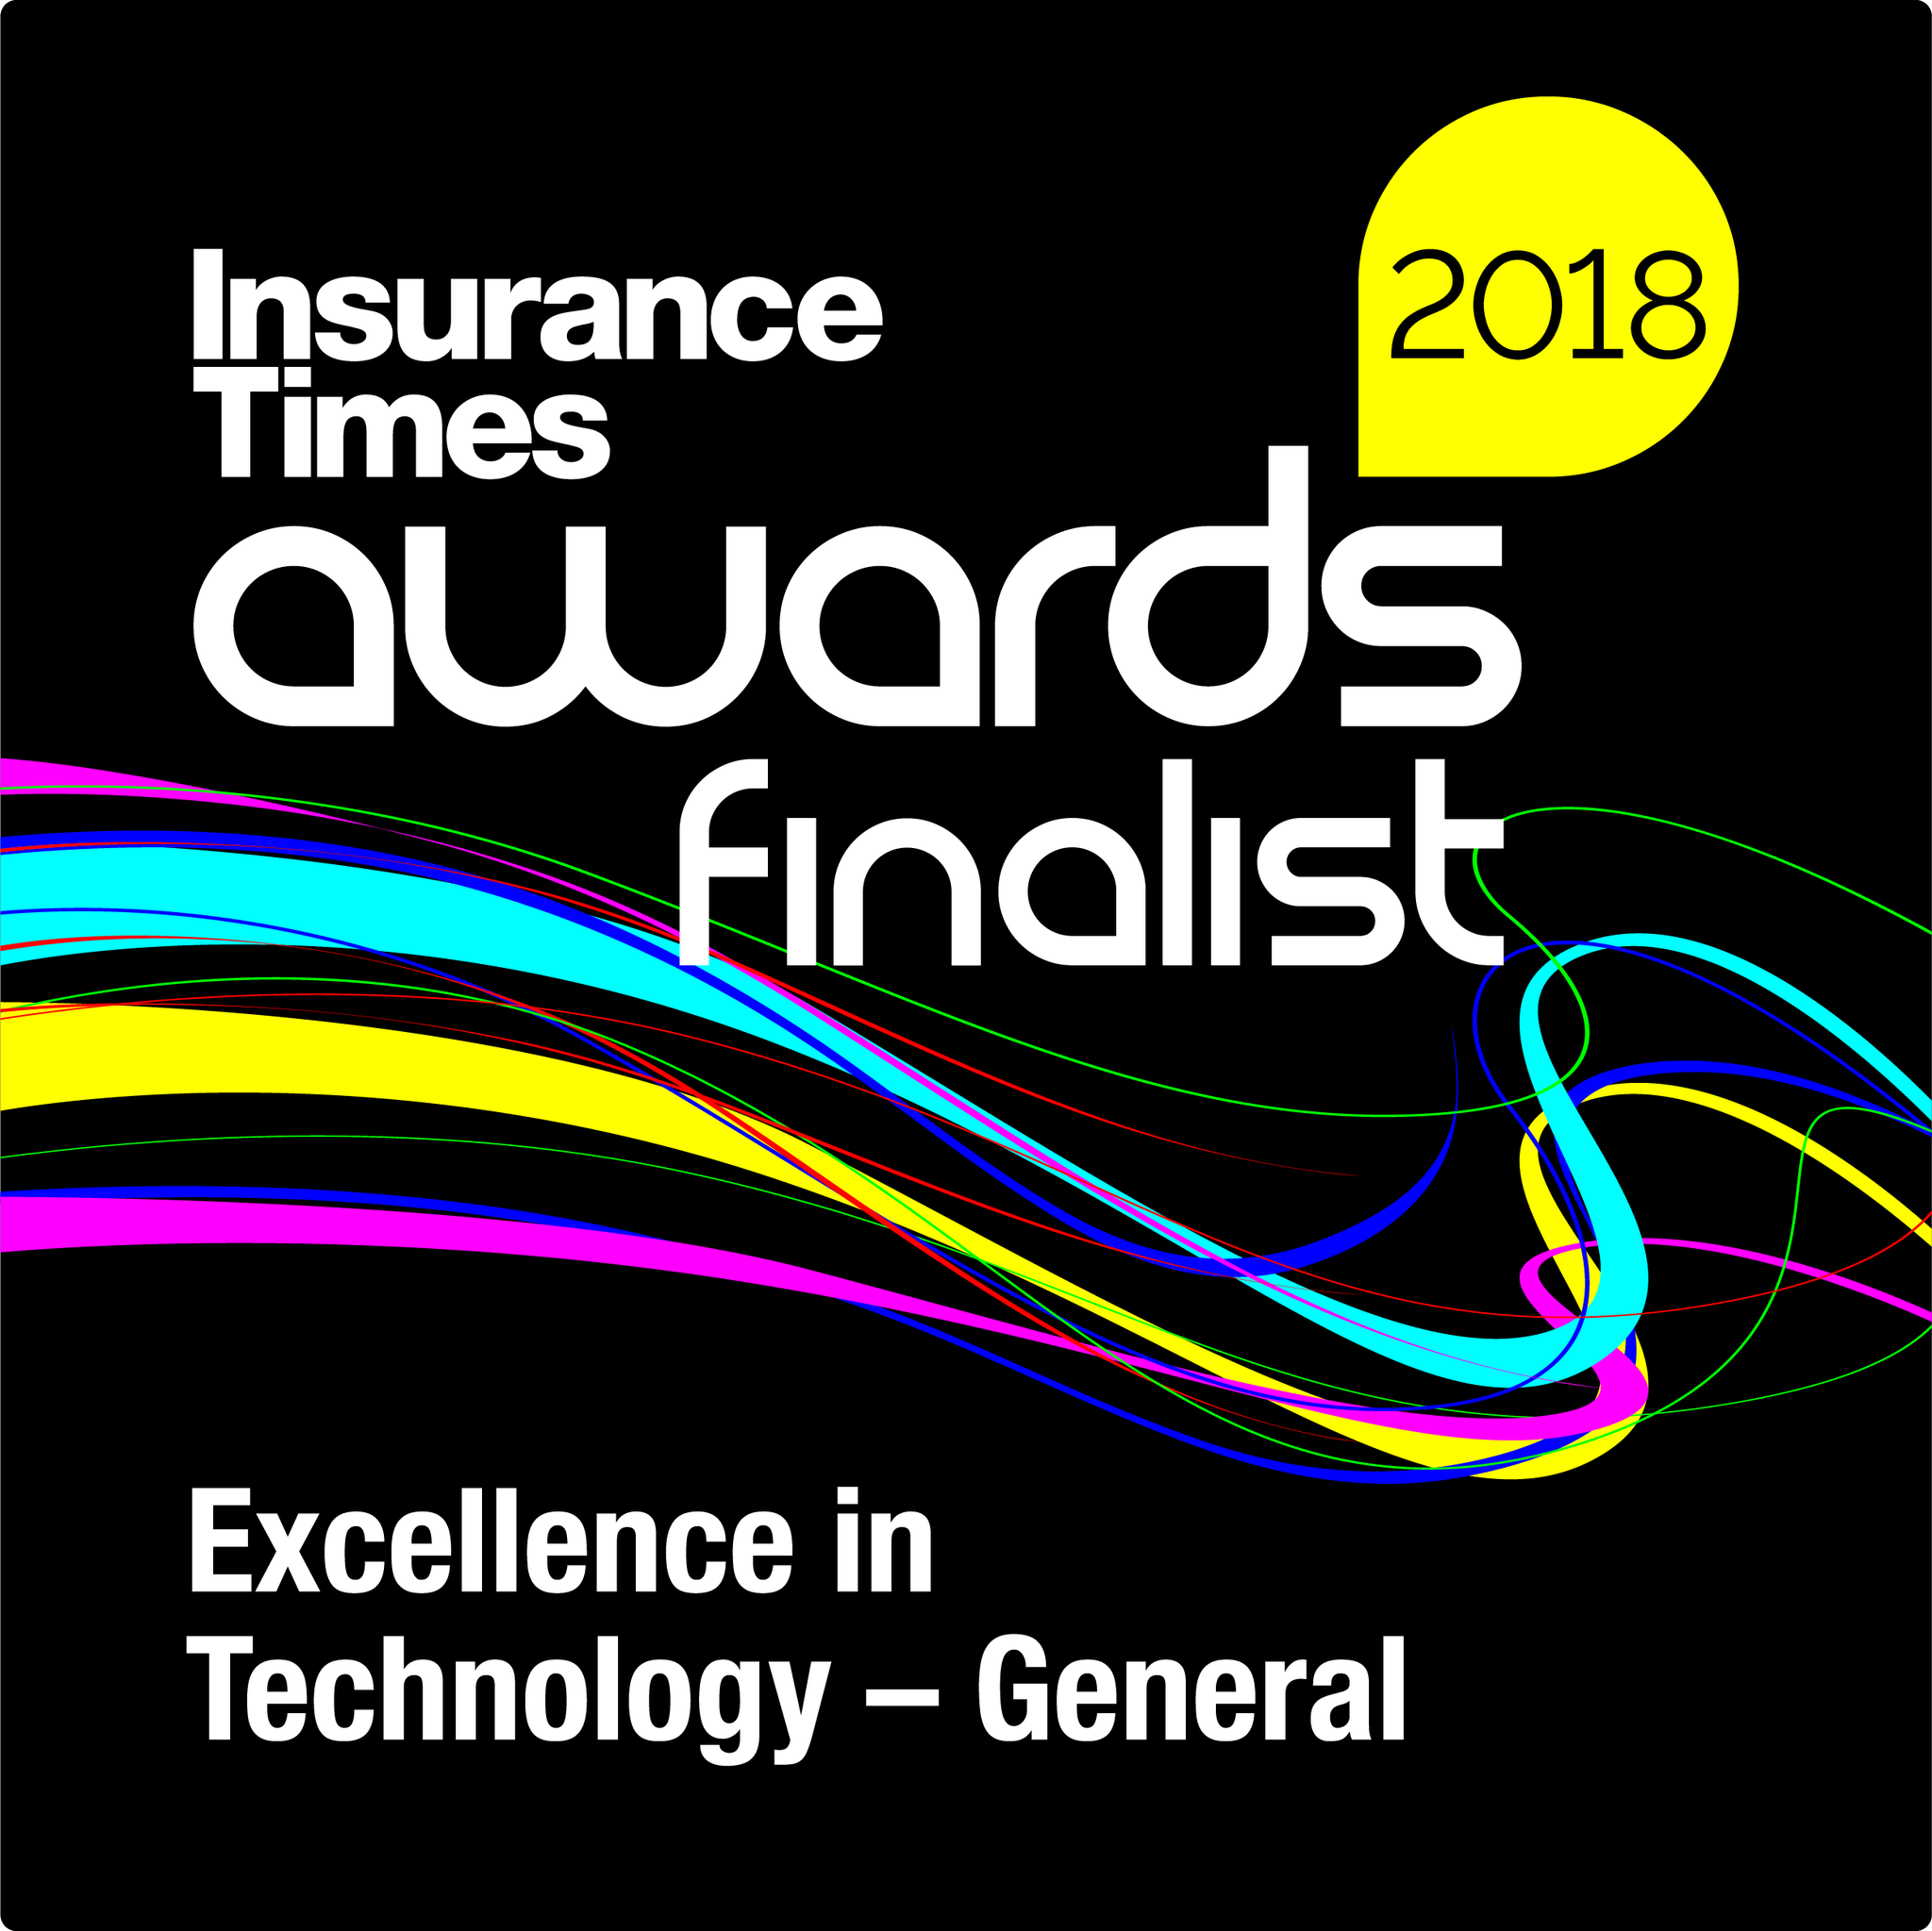 Synectics Solutions shortlisted as finalists at the Insurance Times Awards 2018